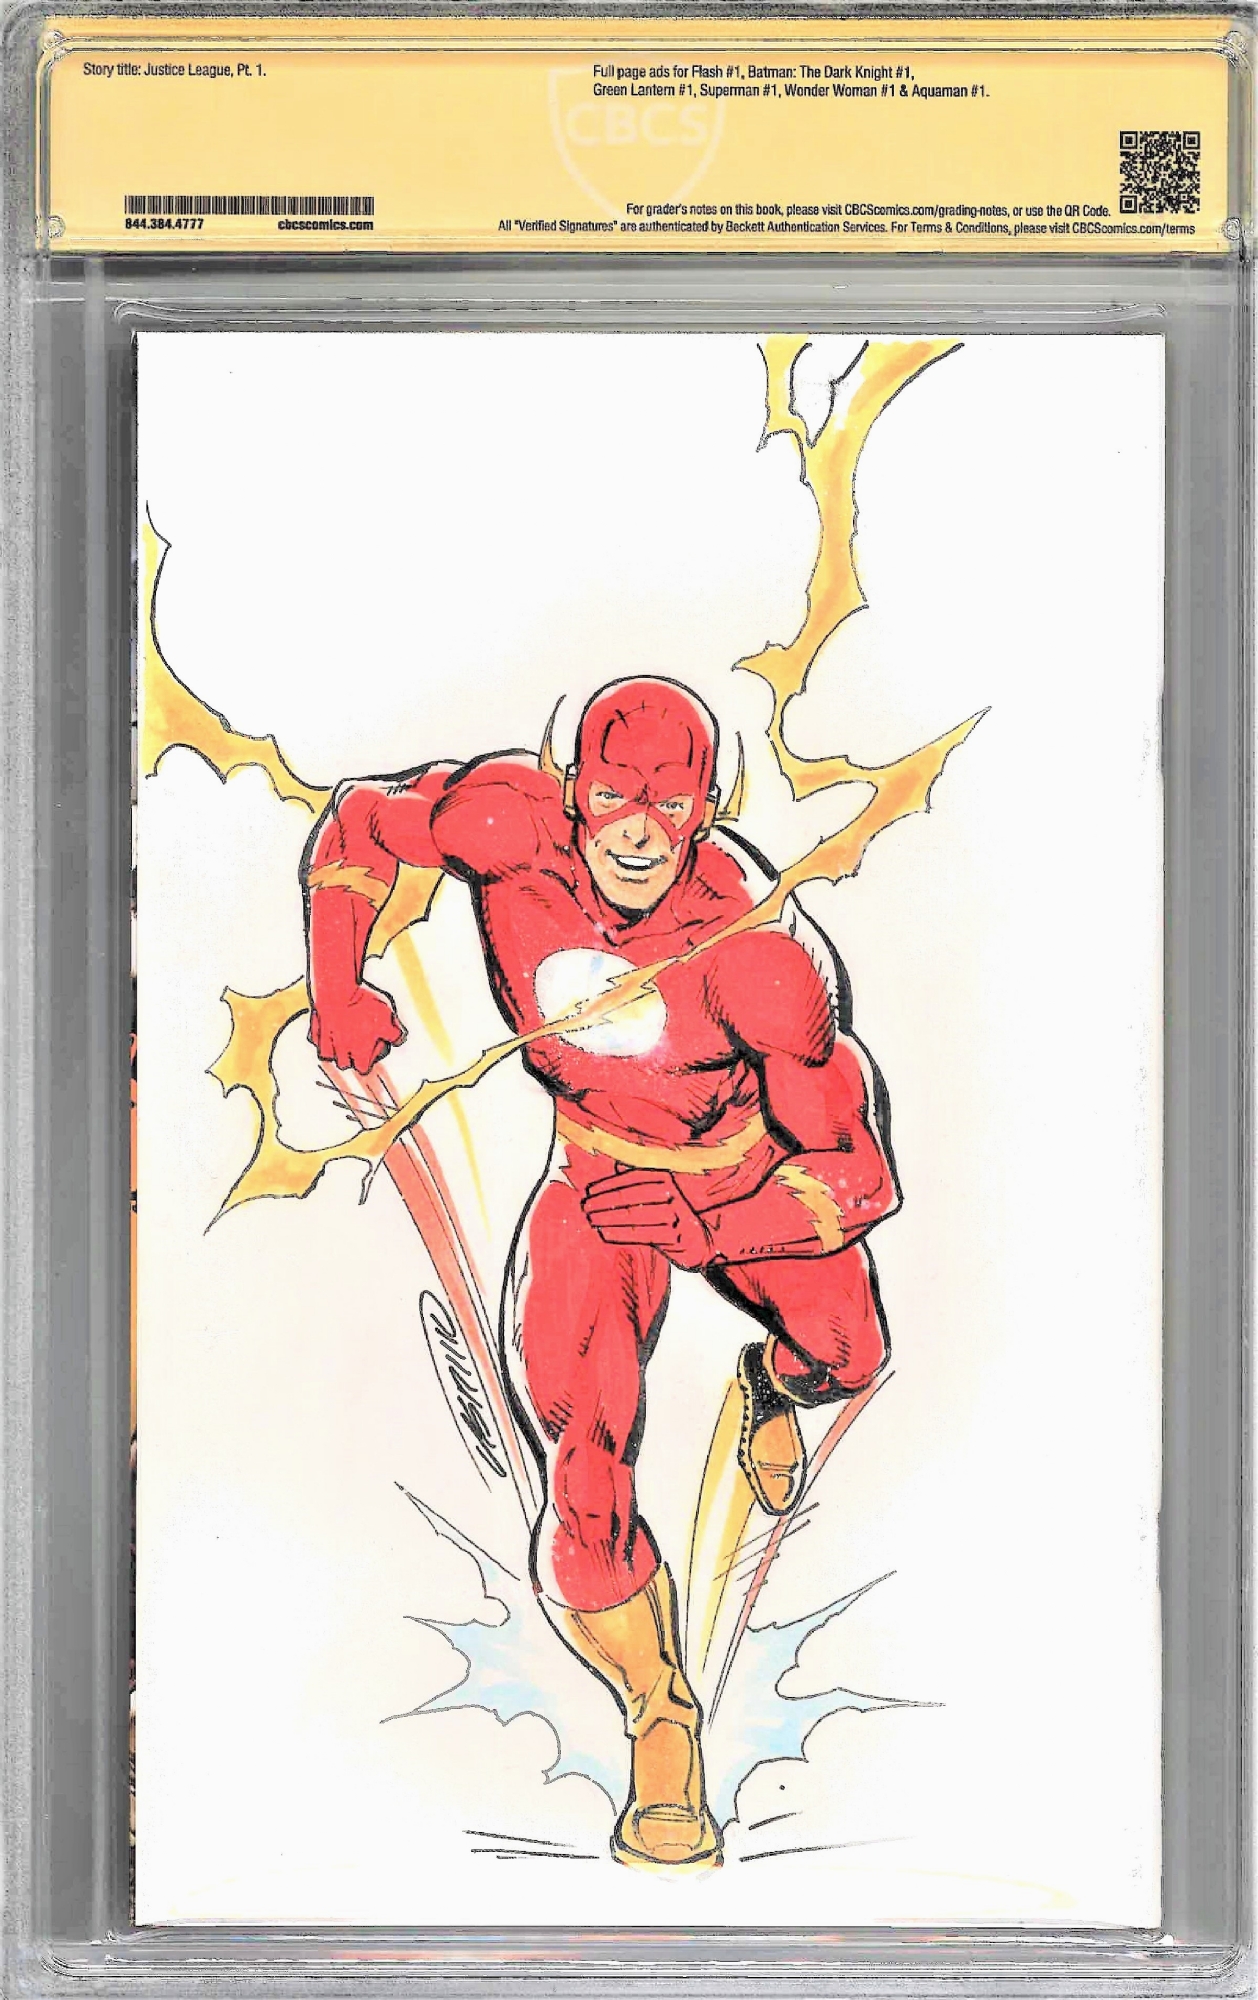 Barry Allen Drawing Picture - Drawing Skill